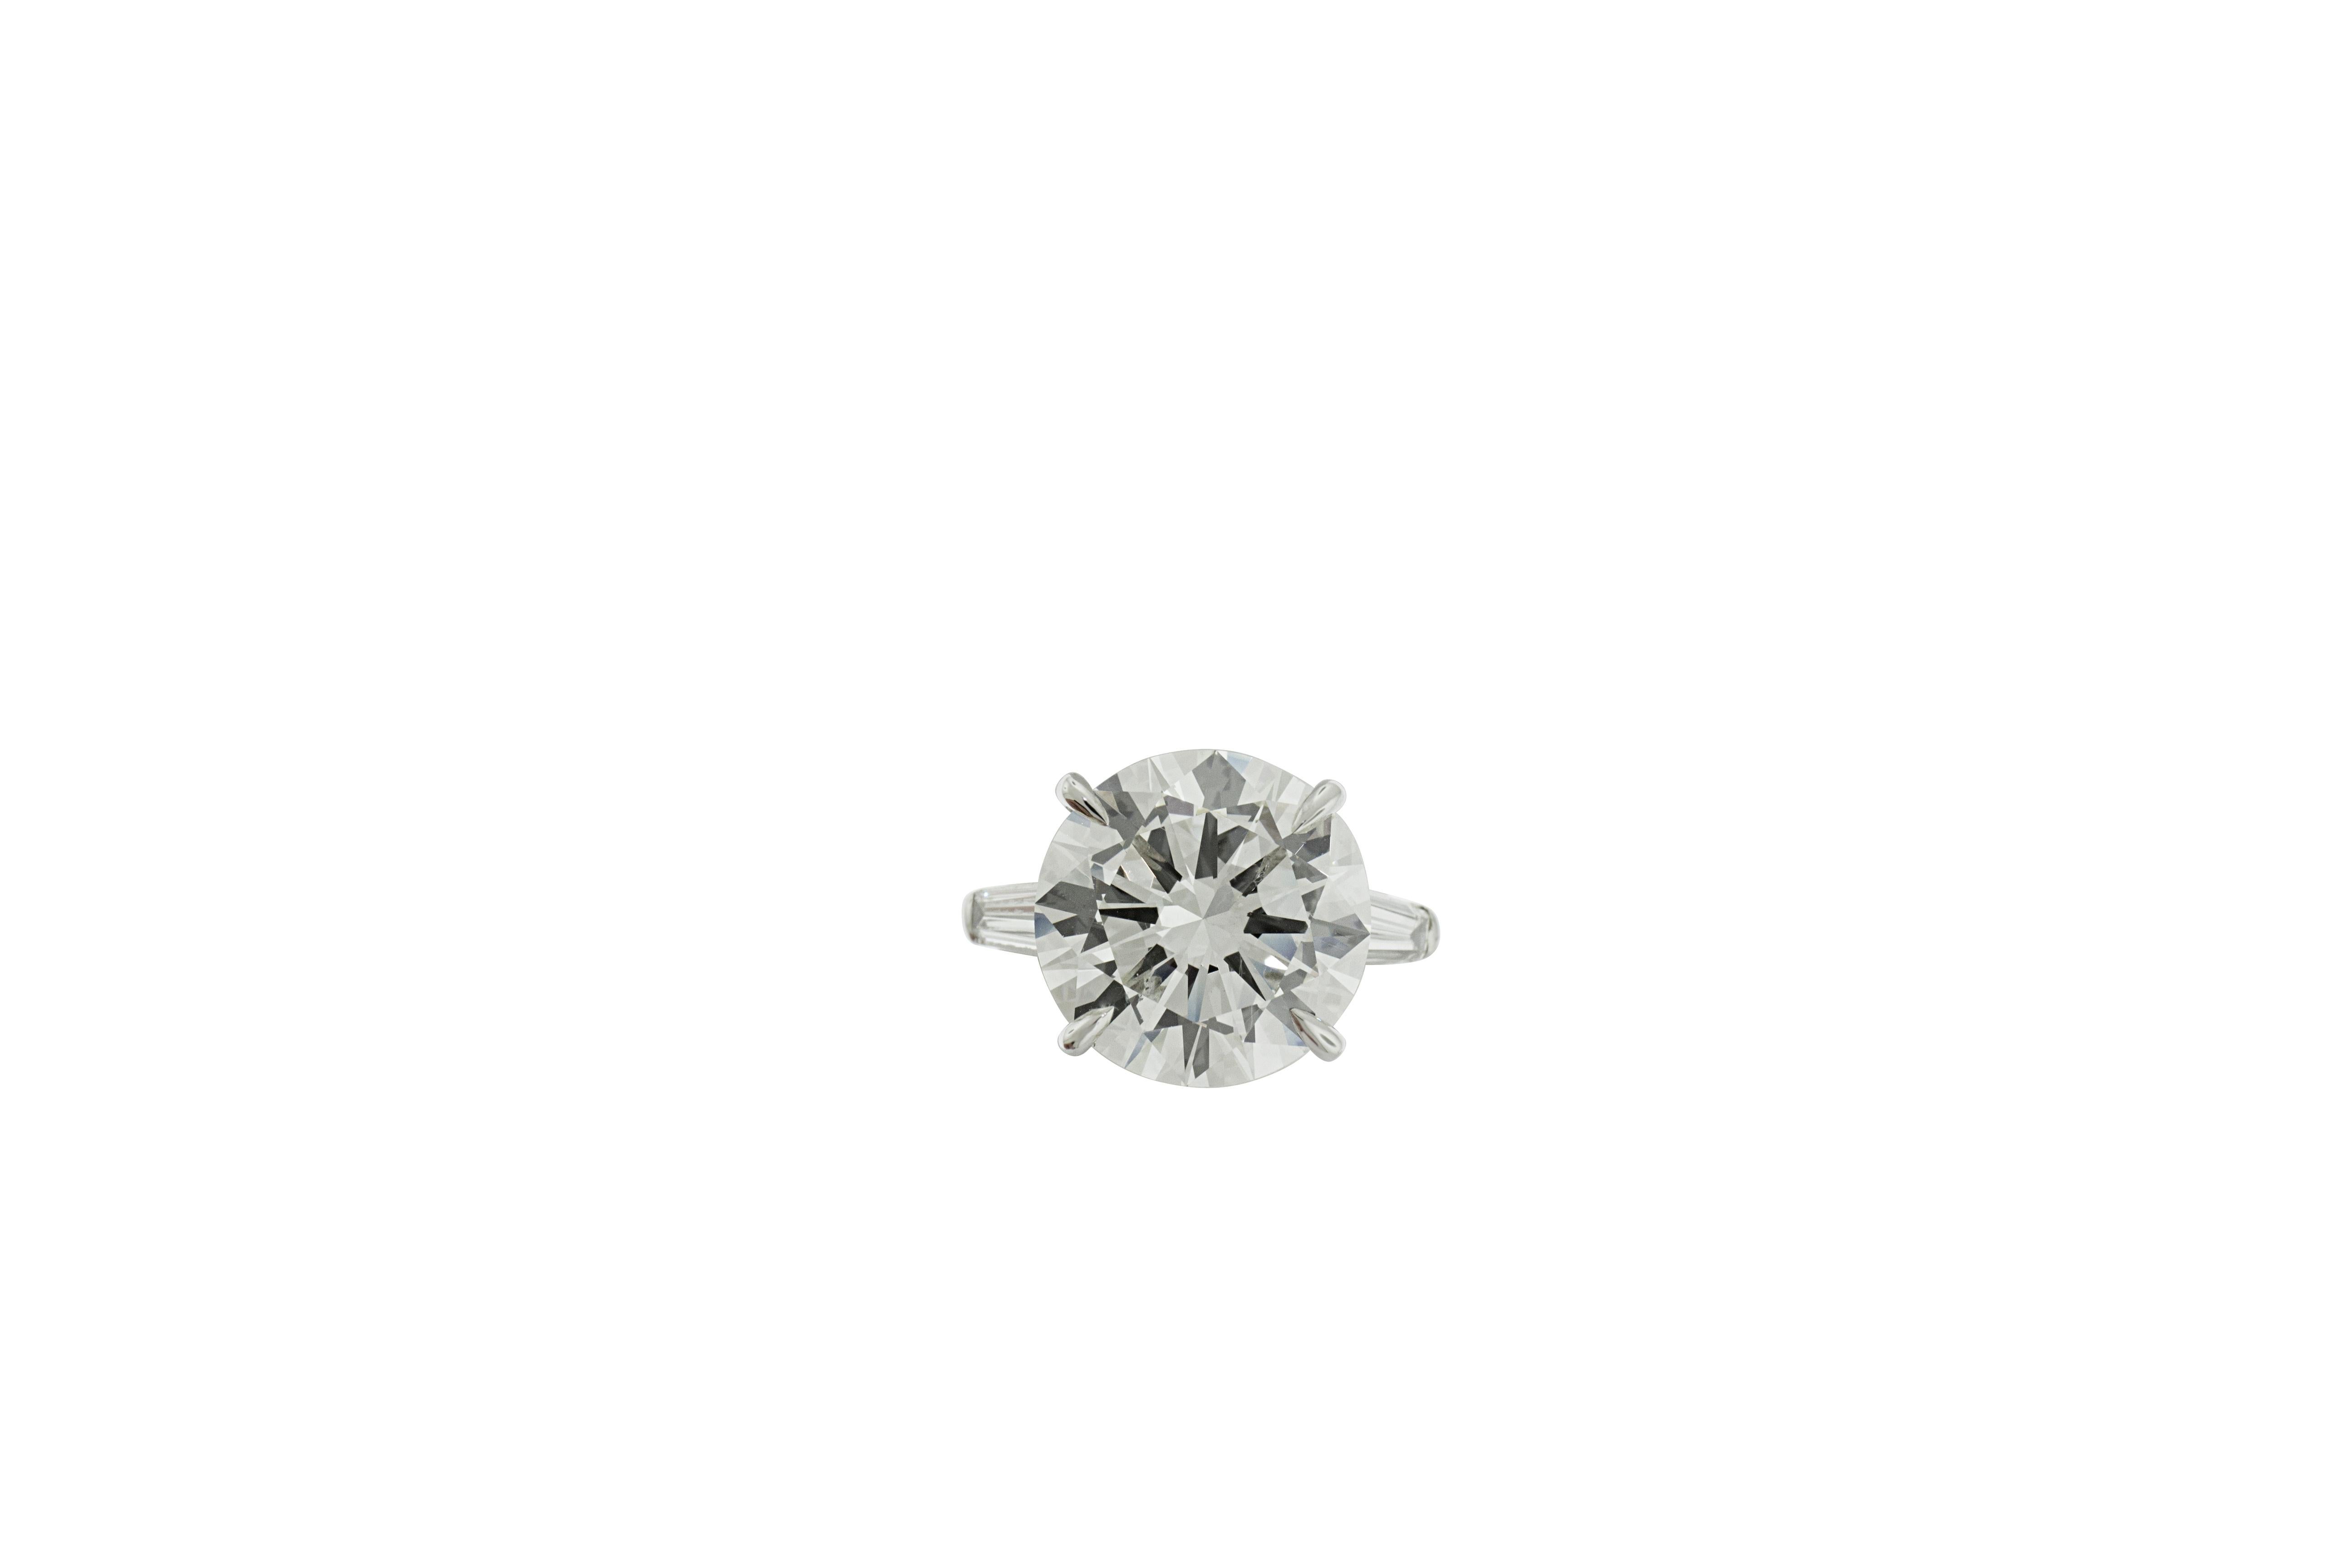 Contemporary 9.05 Carat GIA Certified Round Diamond Engagement Ring